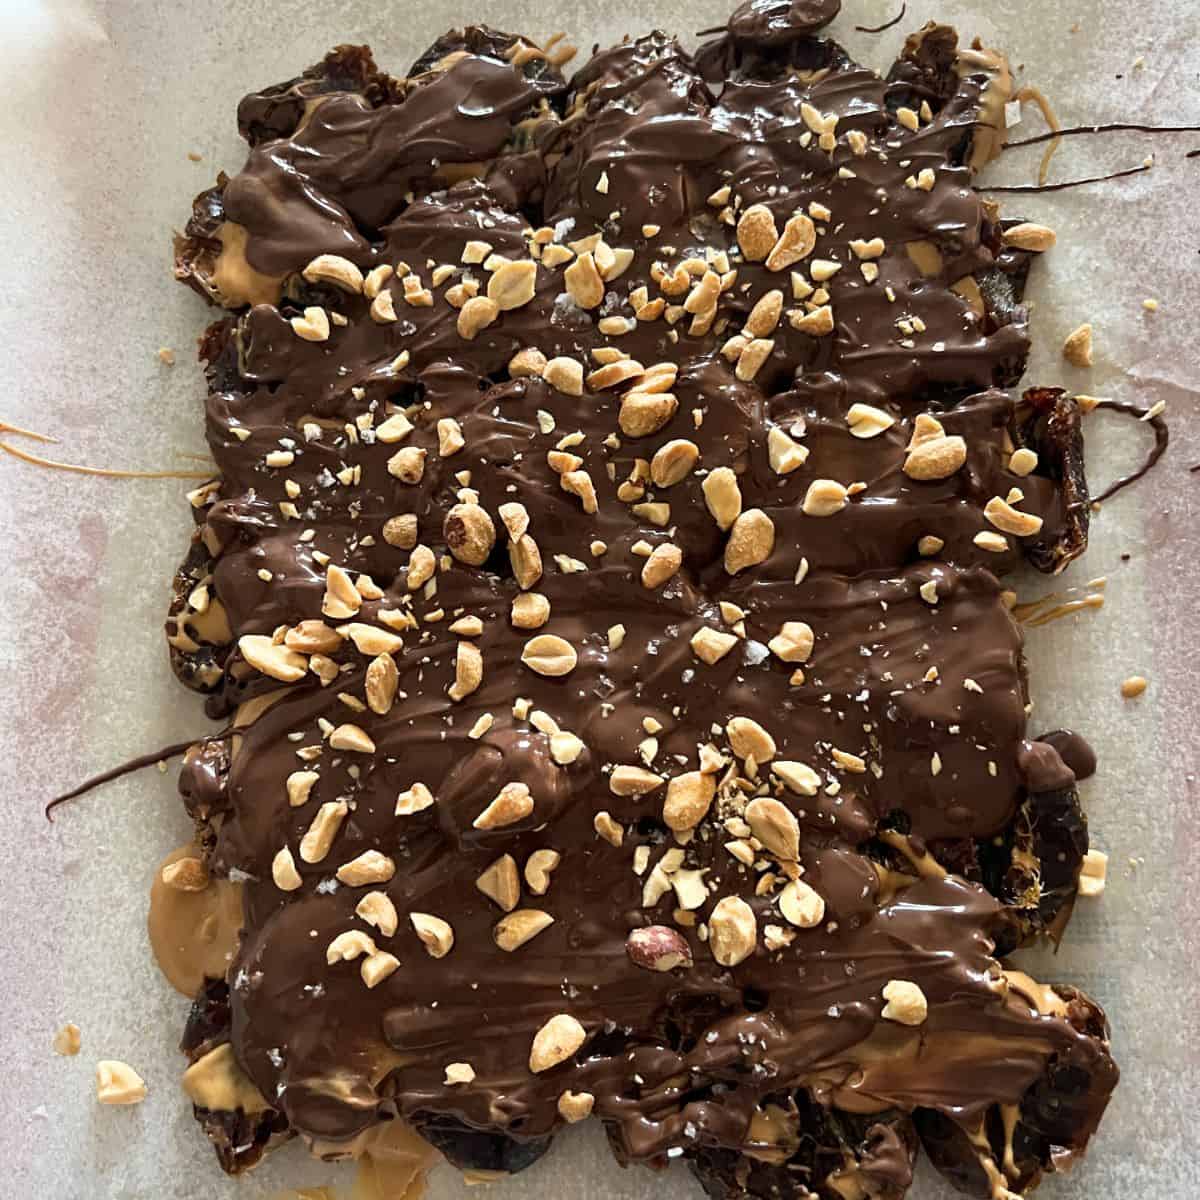 This viral snicker date bark are stuffed with creamy peanut butter and get drizzled in chocolate